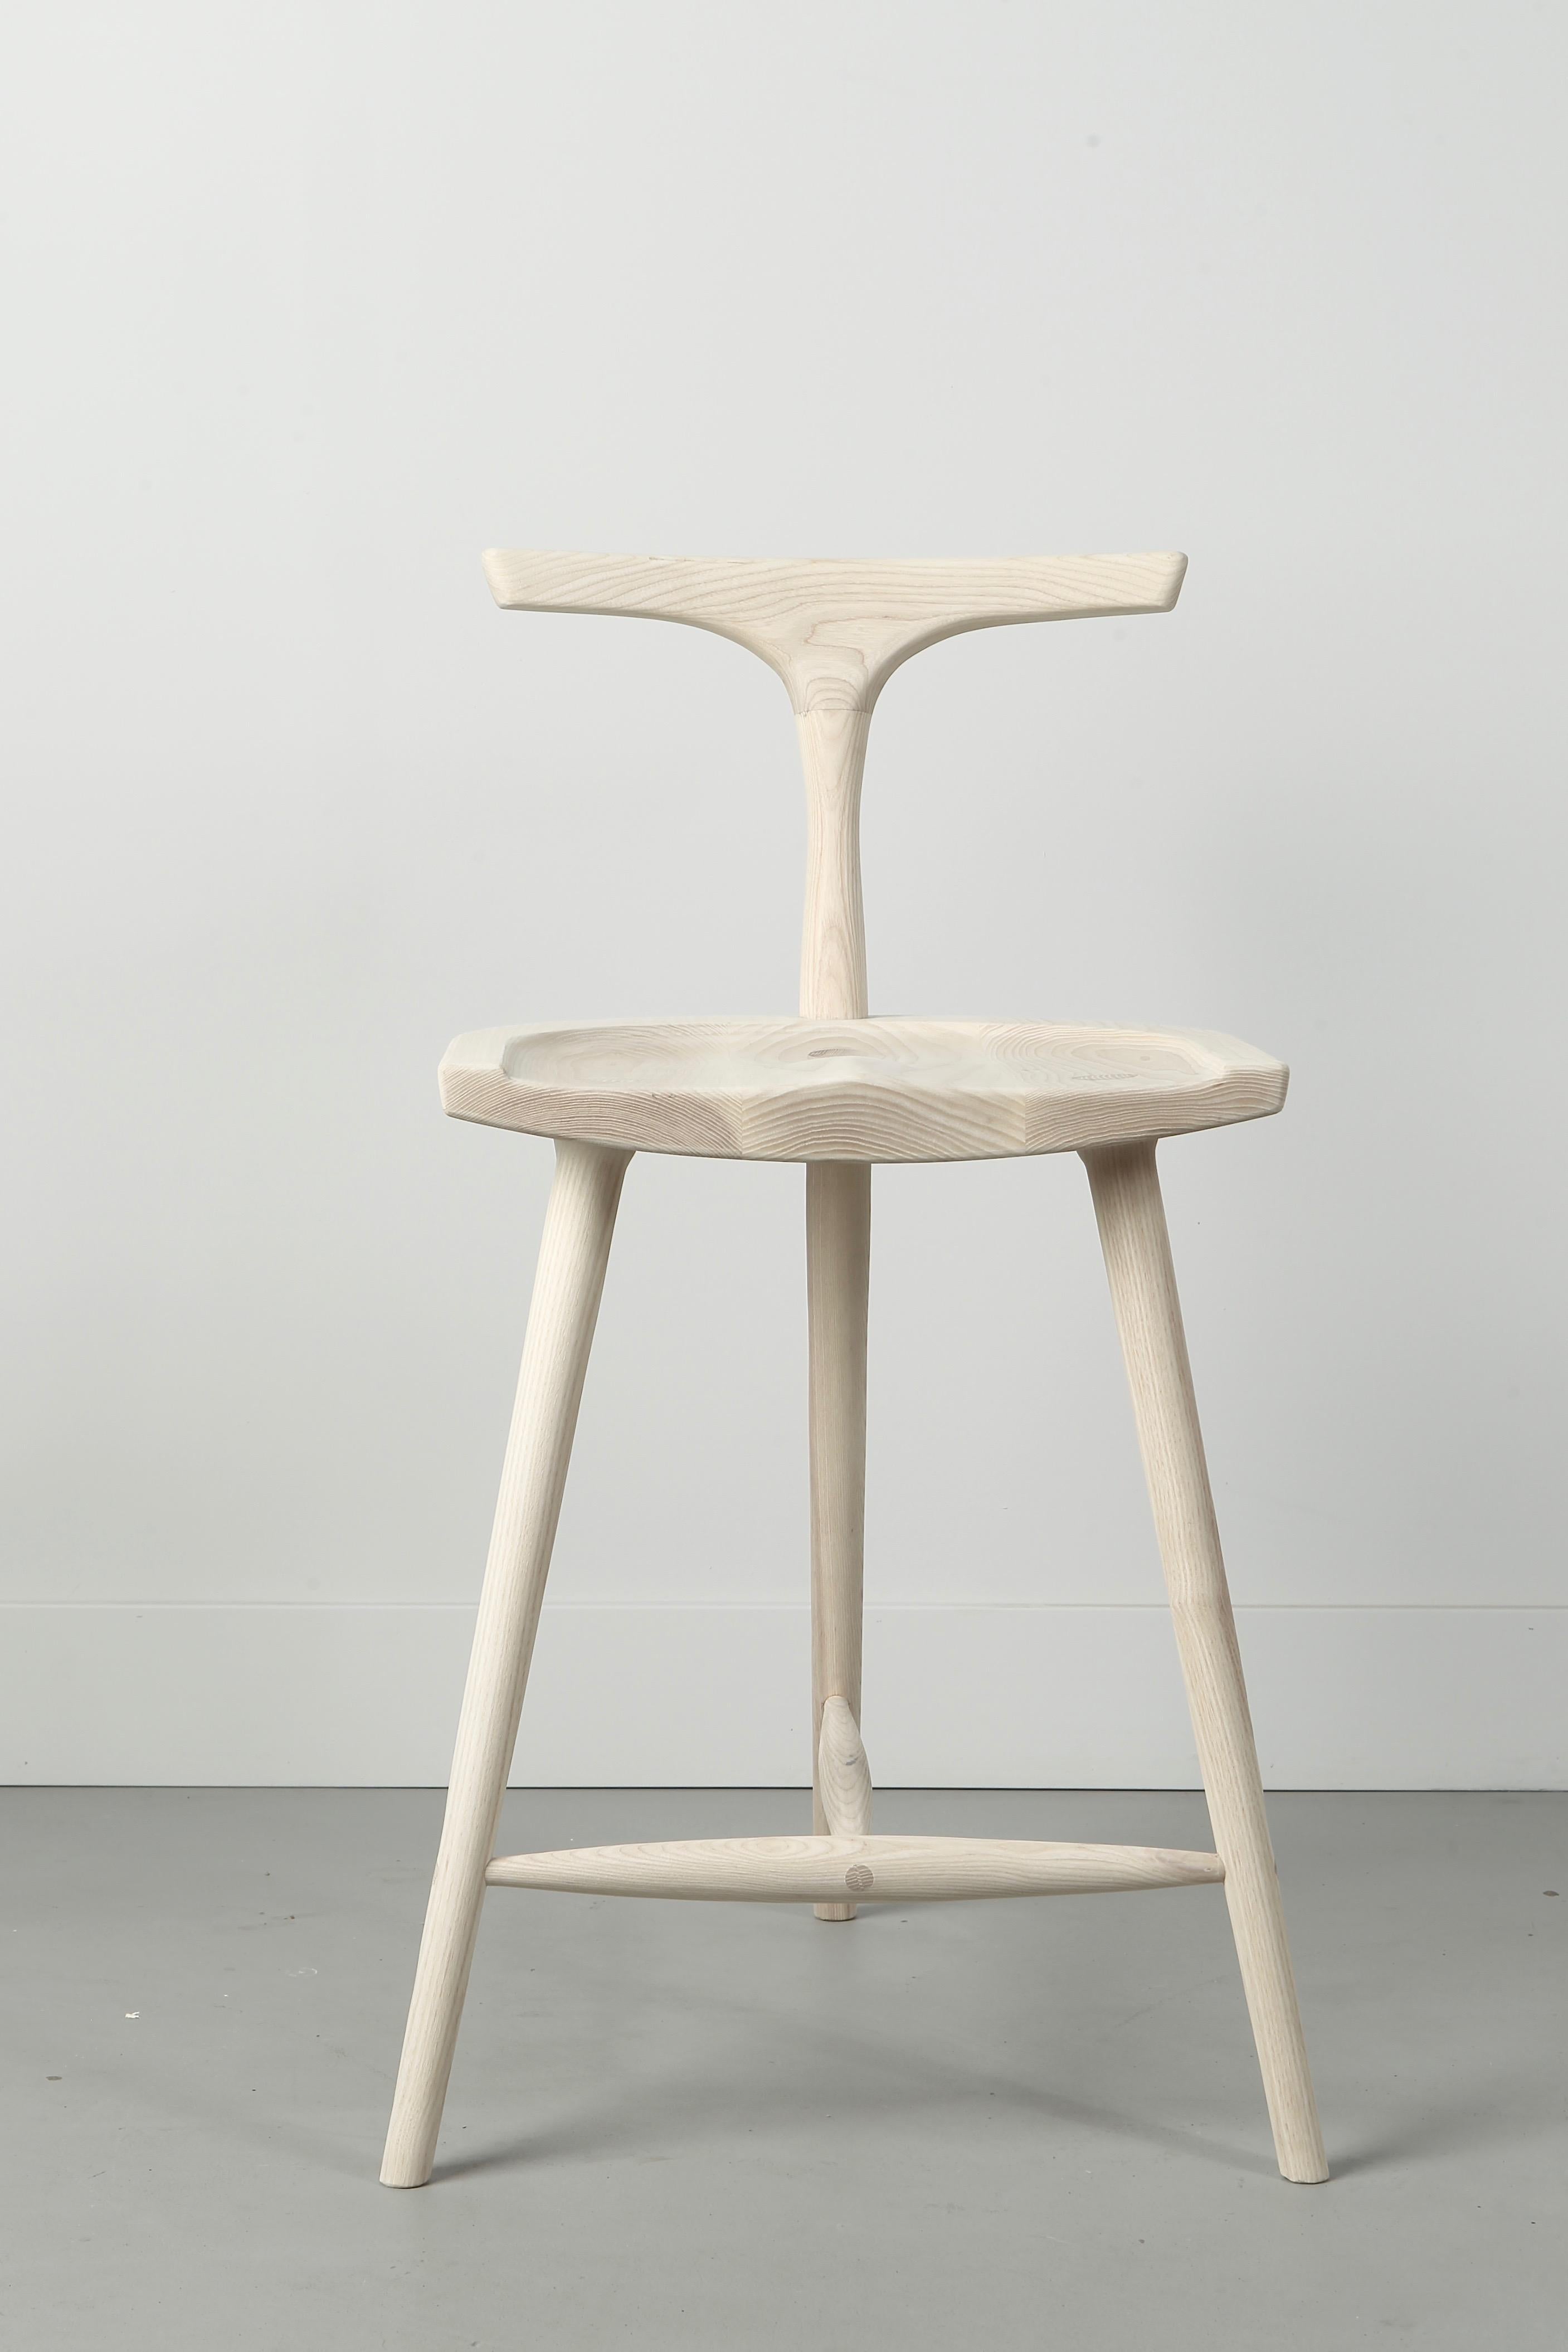 Comfortable, elegant and Classic, a design that will beautifully suit any home interior. Crafted from solid American ash, hand-selected for color uniformity and quality. The Krane stool features a generously sized, ergonomically sculpted seat with a